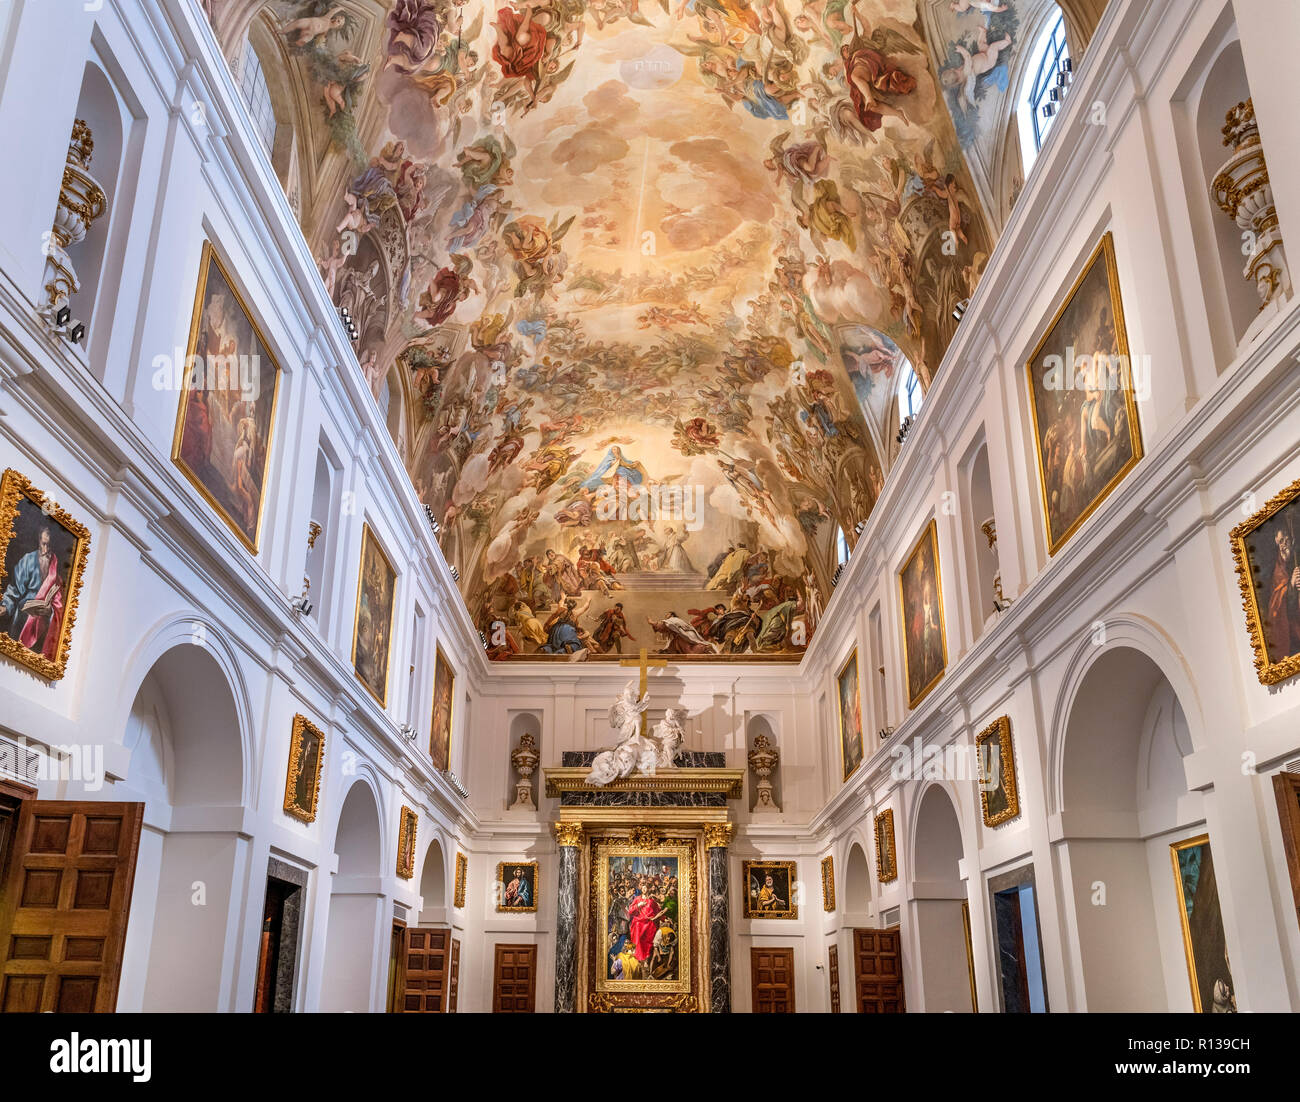 The Sacristy inToledo Cathedral with a ceiling fresco by Luca Giordano (1634-1705), Toledo, Castilla-La Mancha, Spain Stock Photo